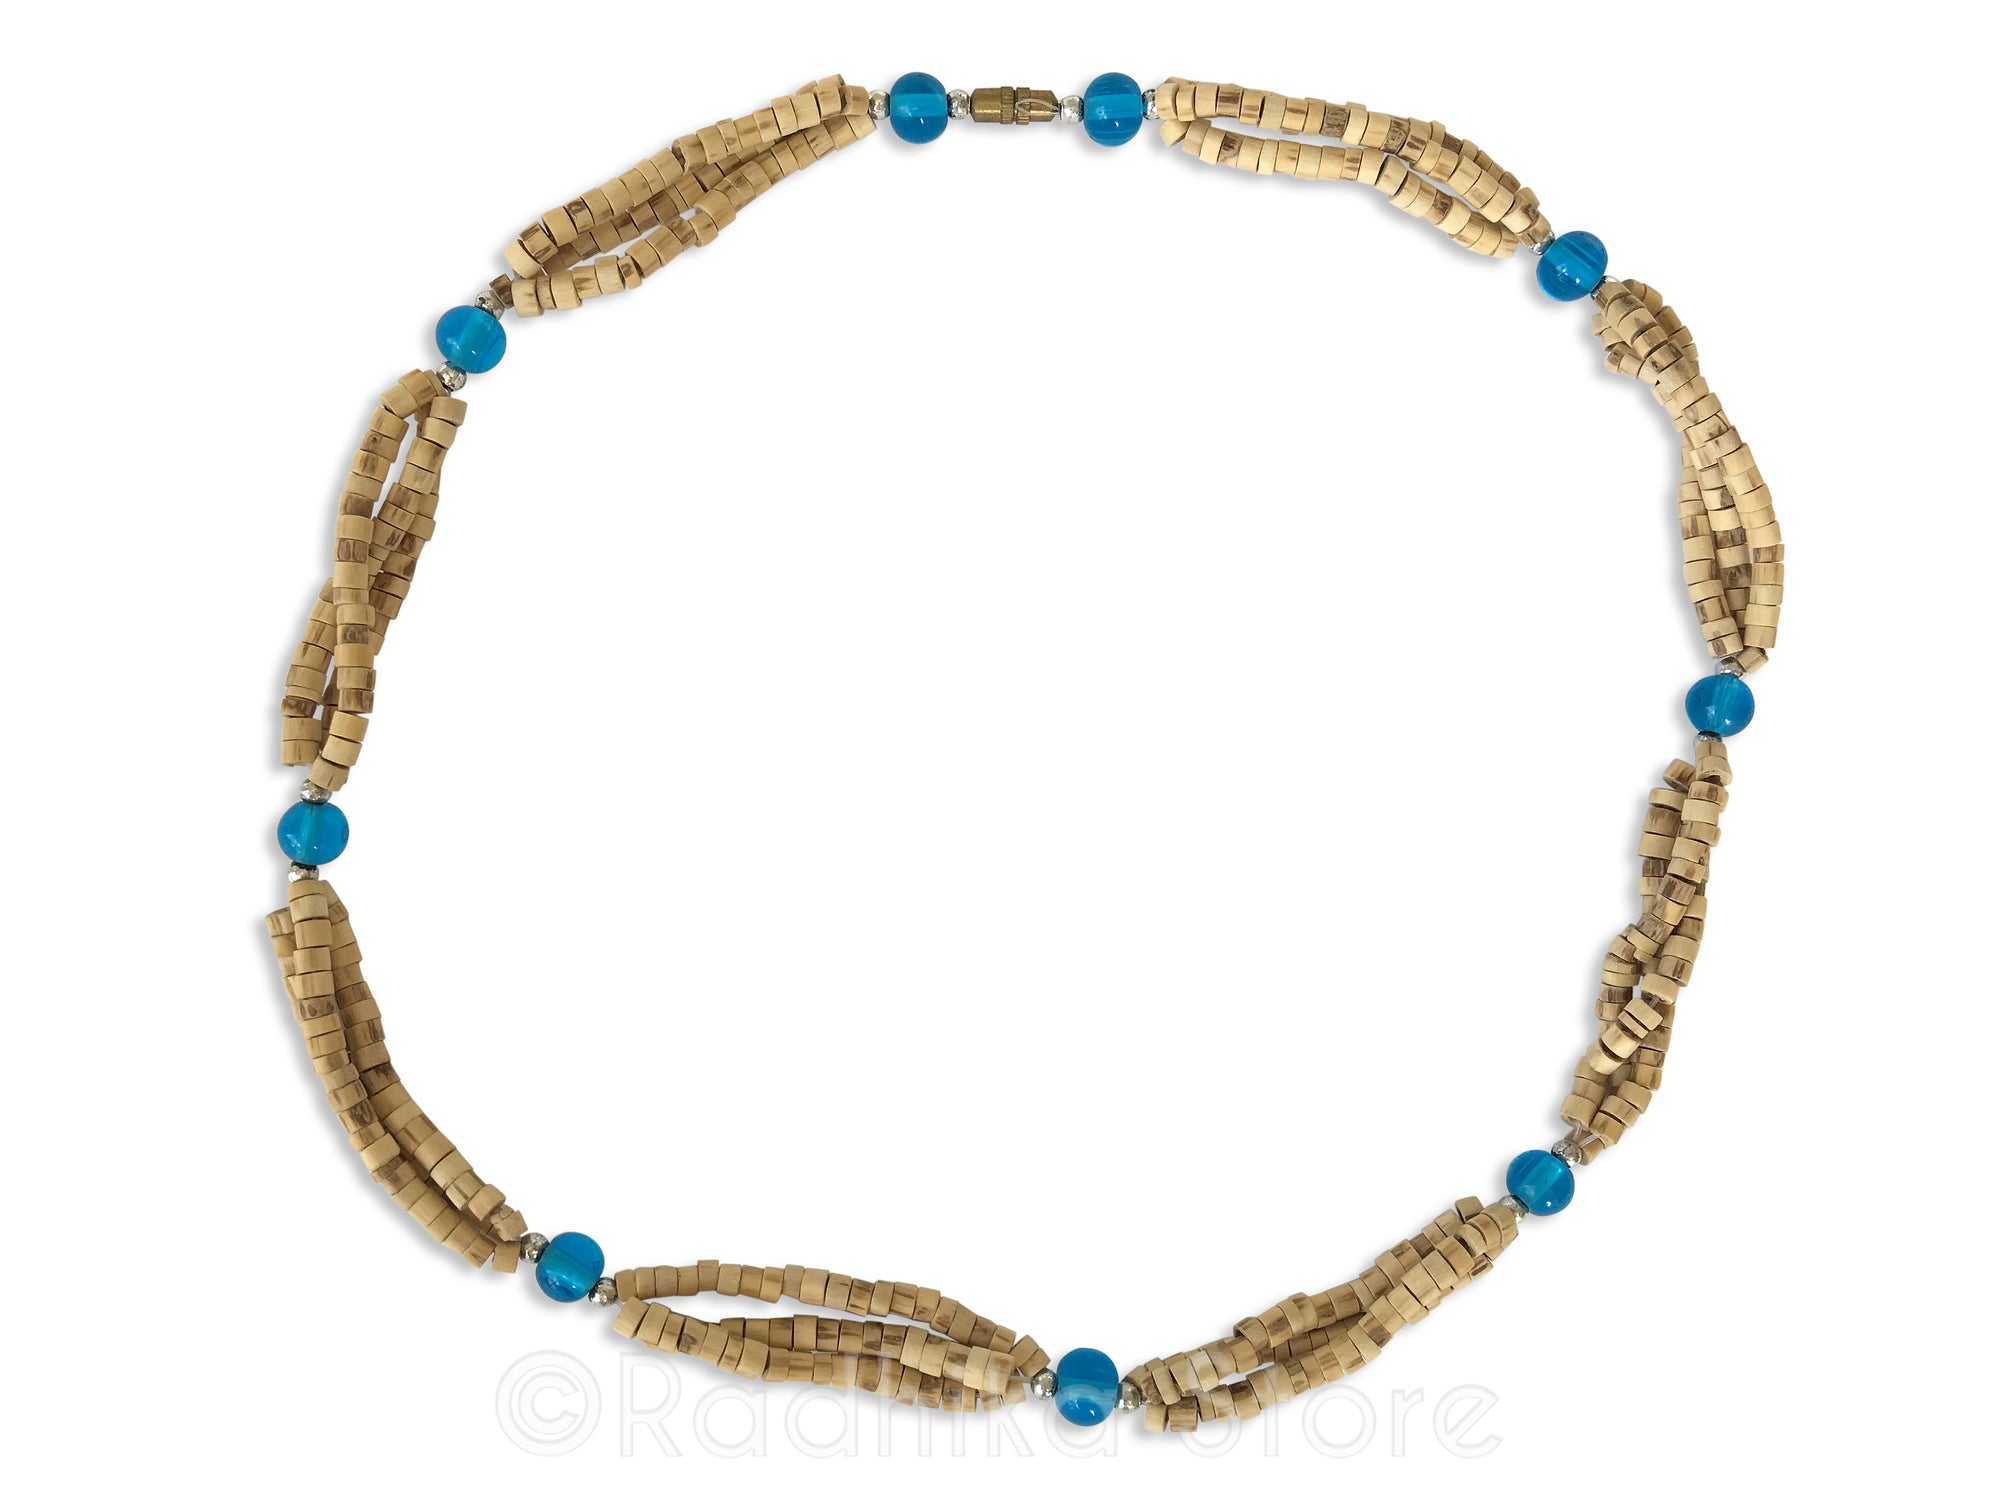 Triple Strand Natural Cut Tulsi Neck Beads -With Blue Glass Bead